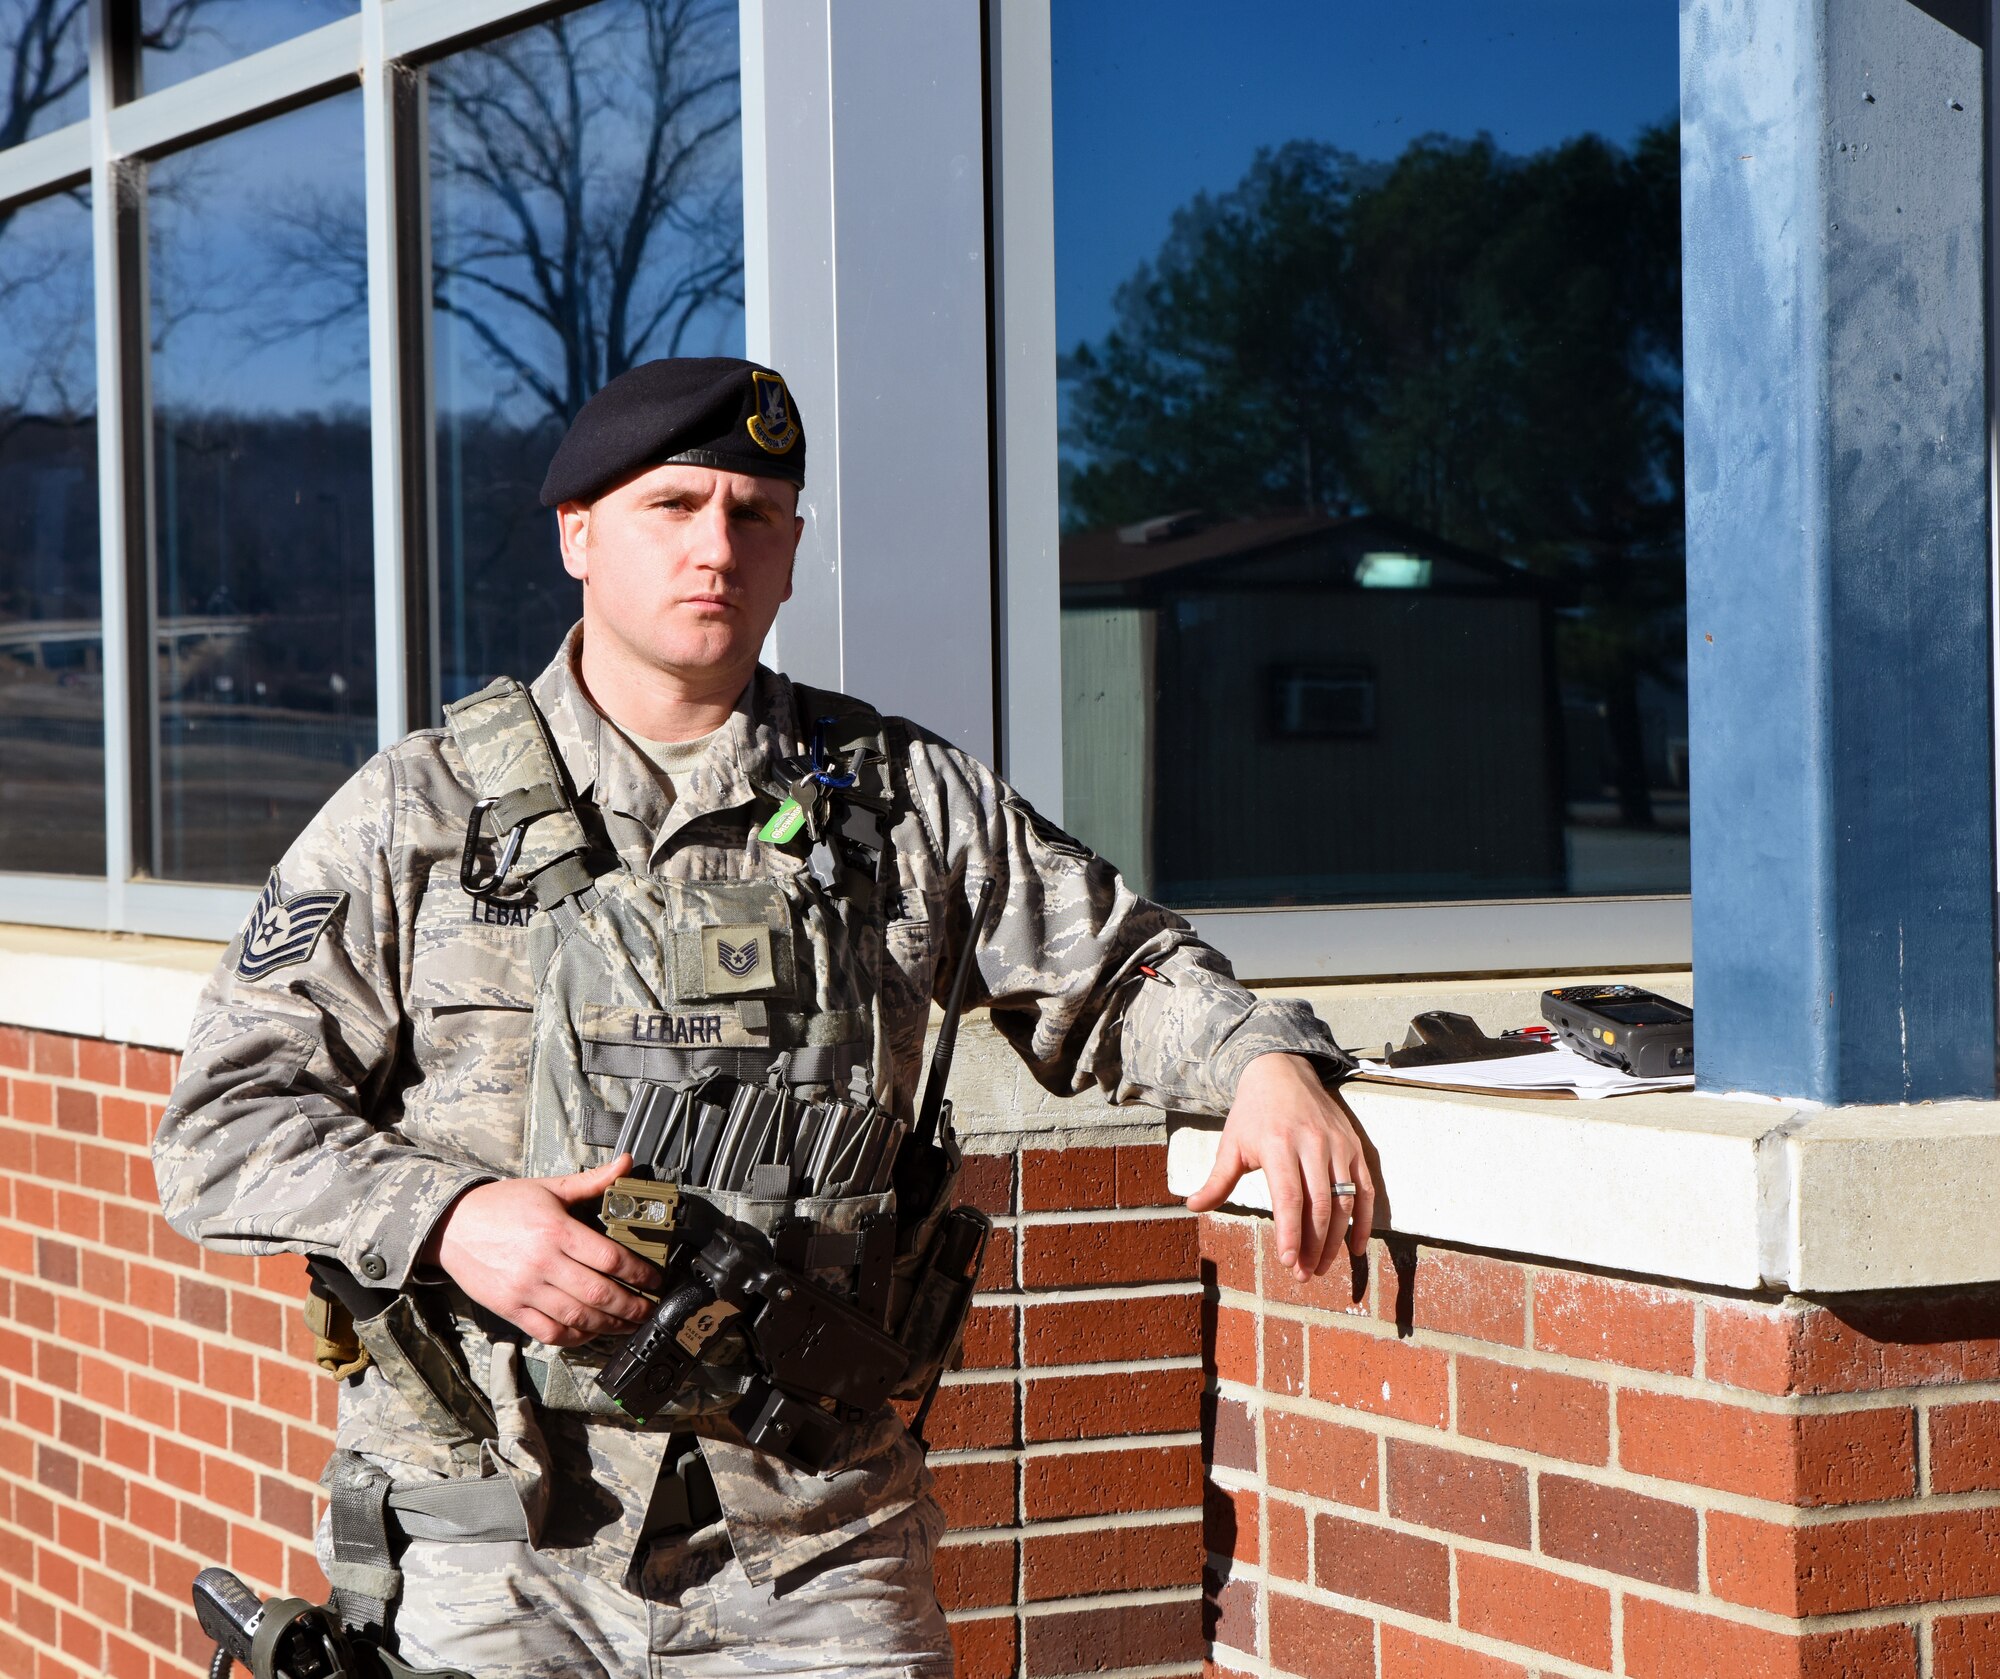 Tech. Sgt. Cameron Lebarr, 188th Security Forces Squadron supervisor, stands on post Dec. 22, 2015 at the front gate of the 188th Wing at Ebbing Air National Guard Base, Fort Smith, Ark. Lebarr has been selected as The Flying Razorback Spotlight for January. (U.S. Air National Guard photo by Senior Airman Cody Martin/Released)